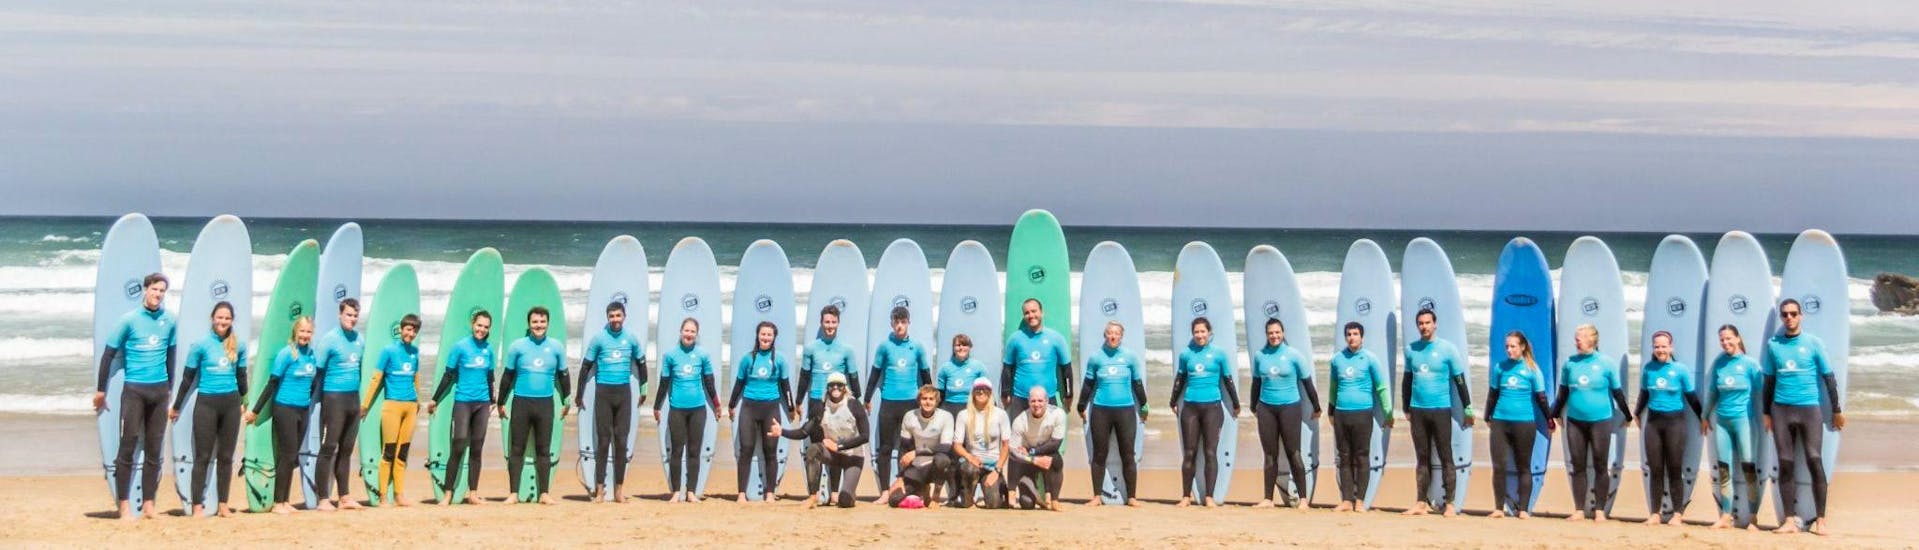 Wavesensations Sagres at a Full Day Private Surfing Lessons for Kids (6-12 y.) in Sagres.